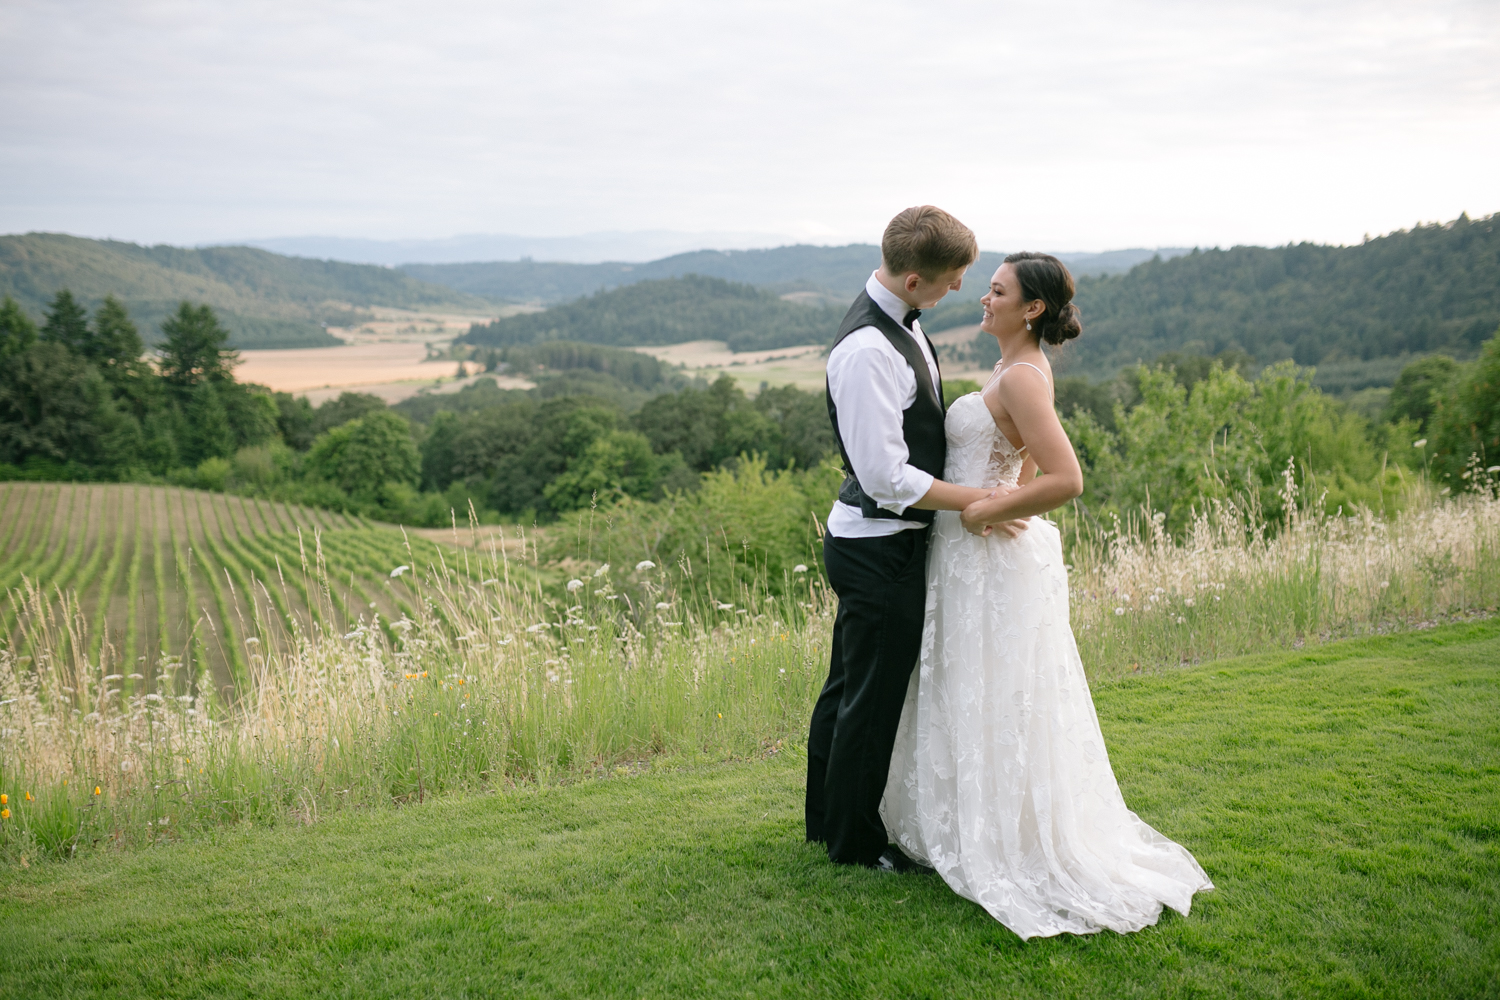 Youngberg Hill Vineyard Wedding in Wine Country Oregon - Corrie Mick Photography-206.jpg